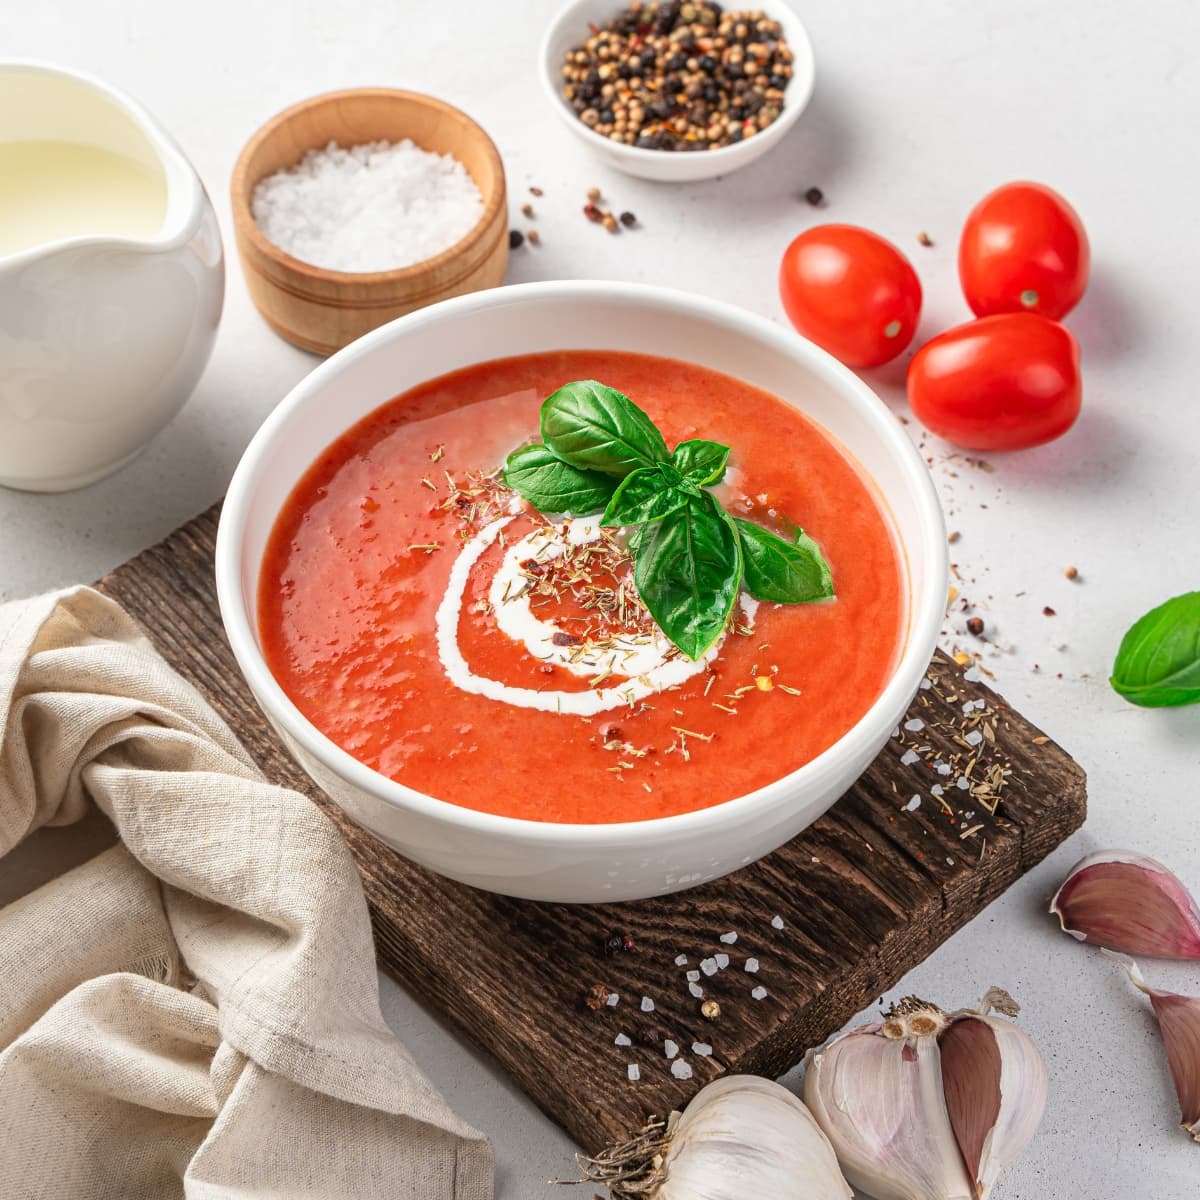 Tomato Basil Soup with Ingredients on a White Table